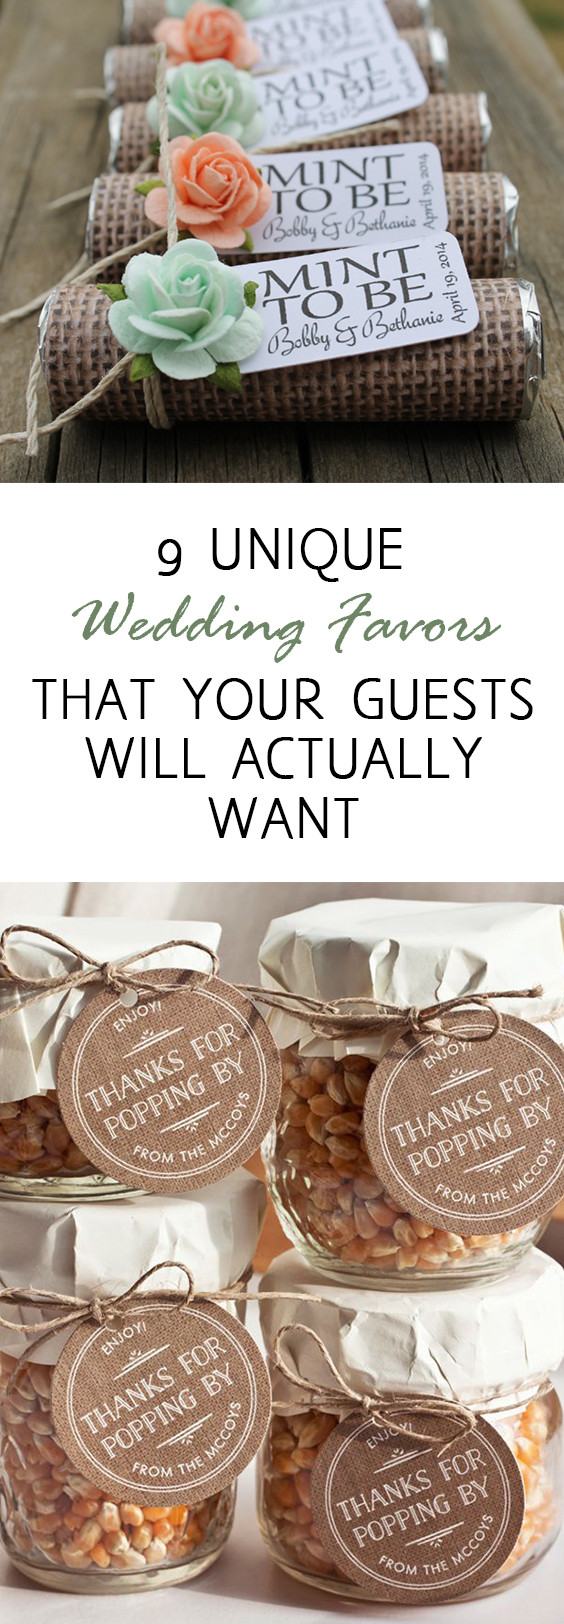 Wedding Favor Ideas Pinterest
 9 Unique Wedding Favors that Your Guests Will Actually